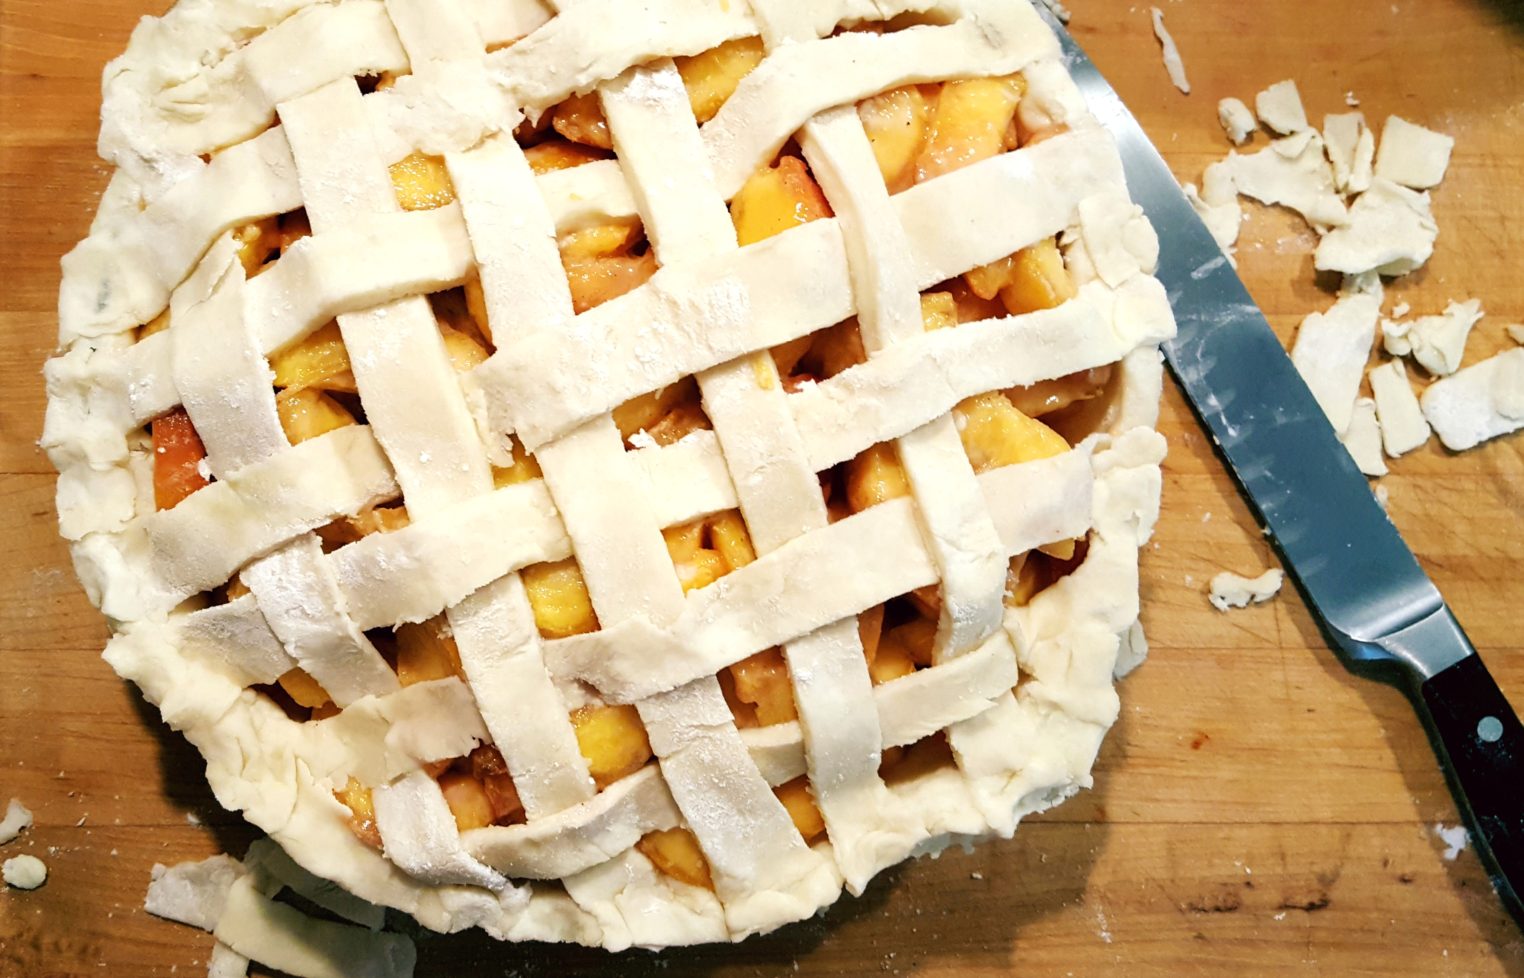 Bake the Perfect Peachy Pie- details on The Pillow Goddess blog!